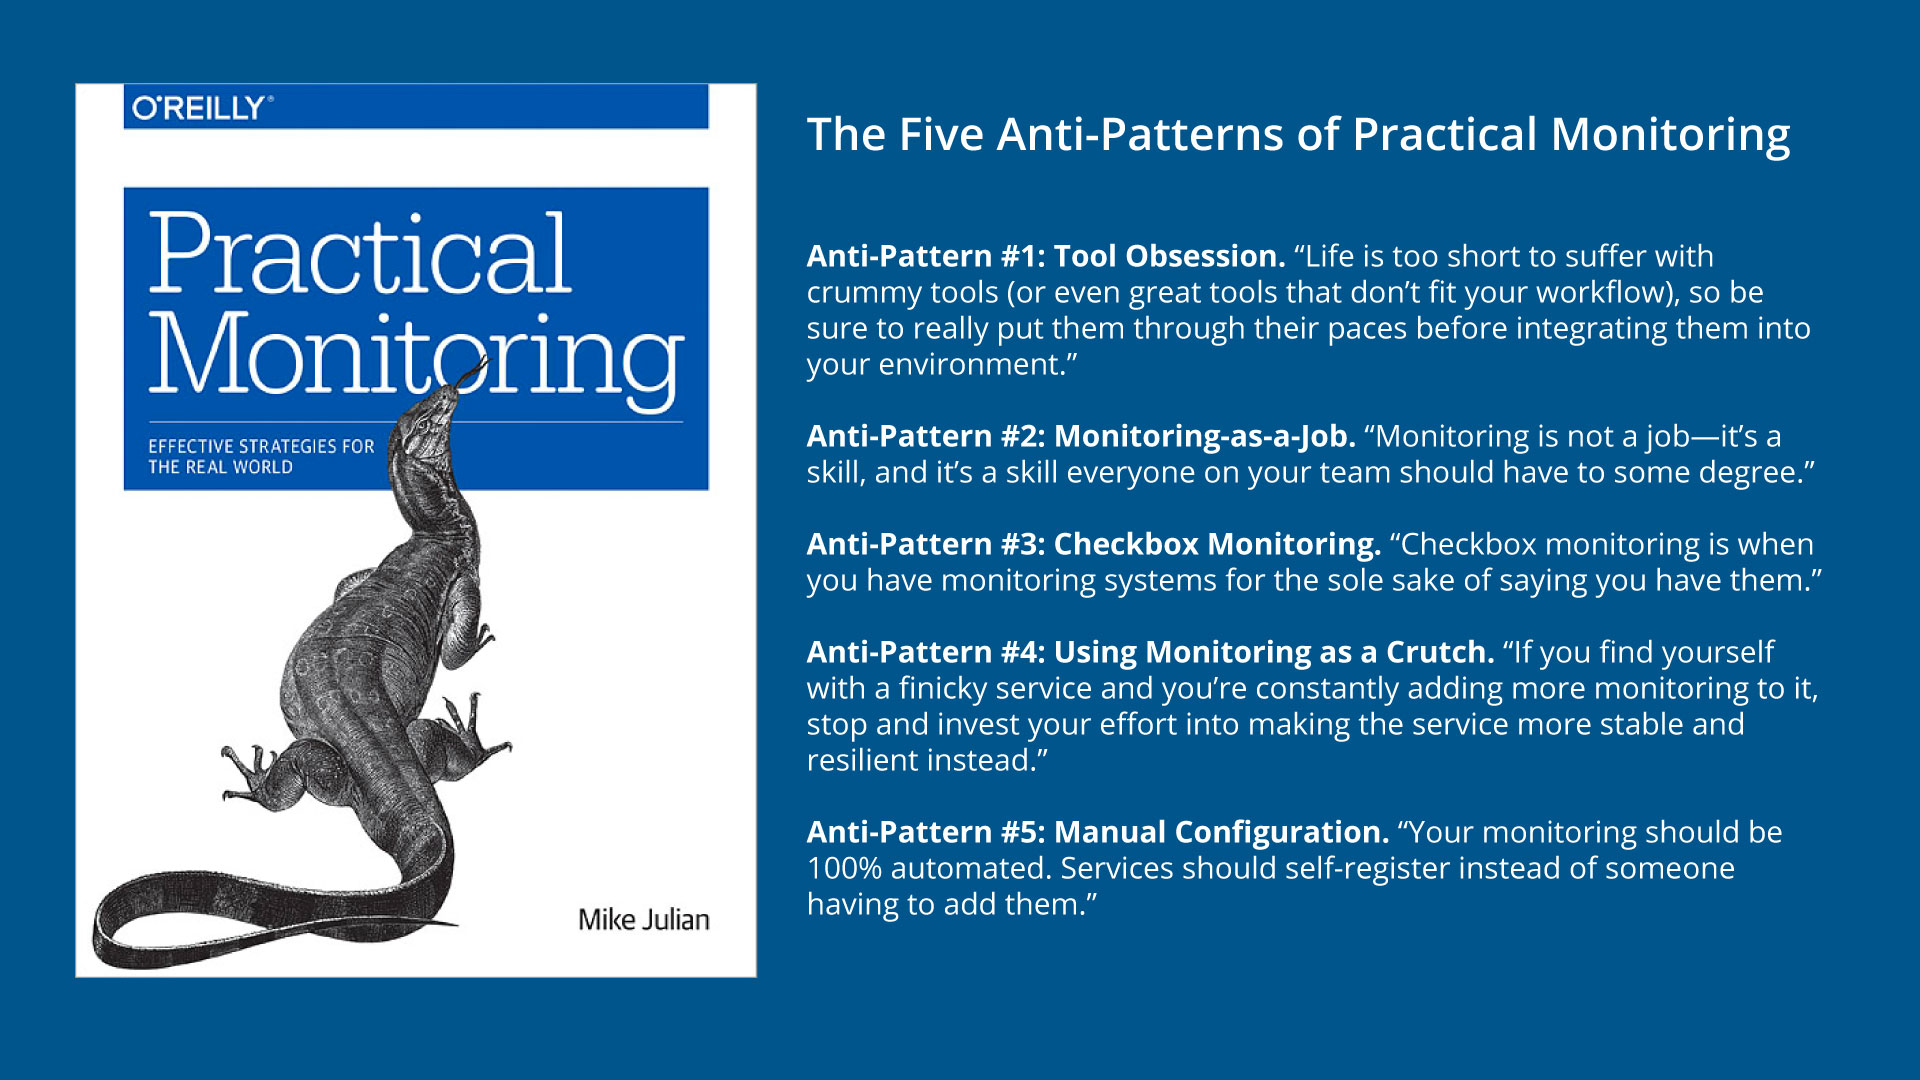 The Five Anti-Patterns of Practical Monitoring